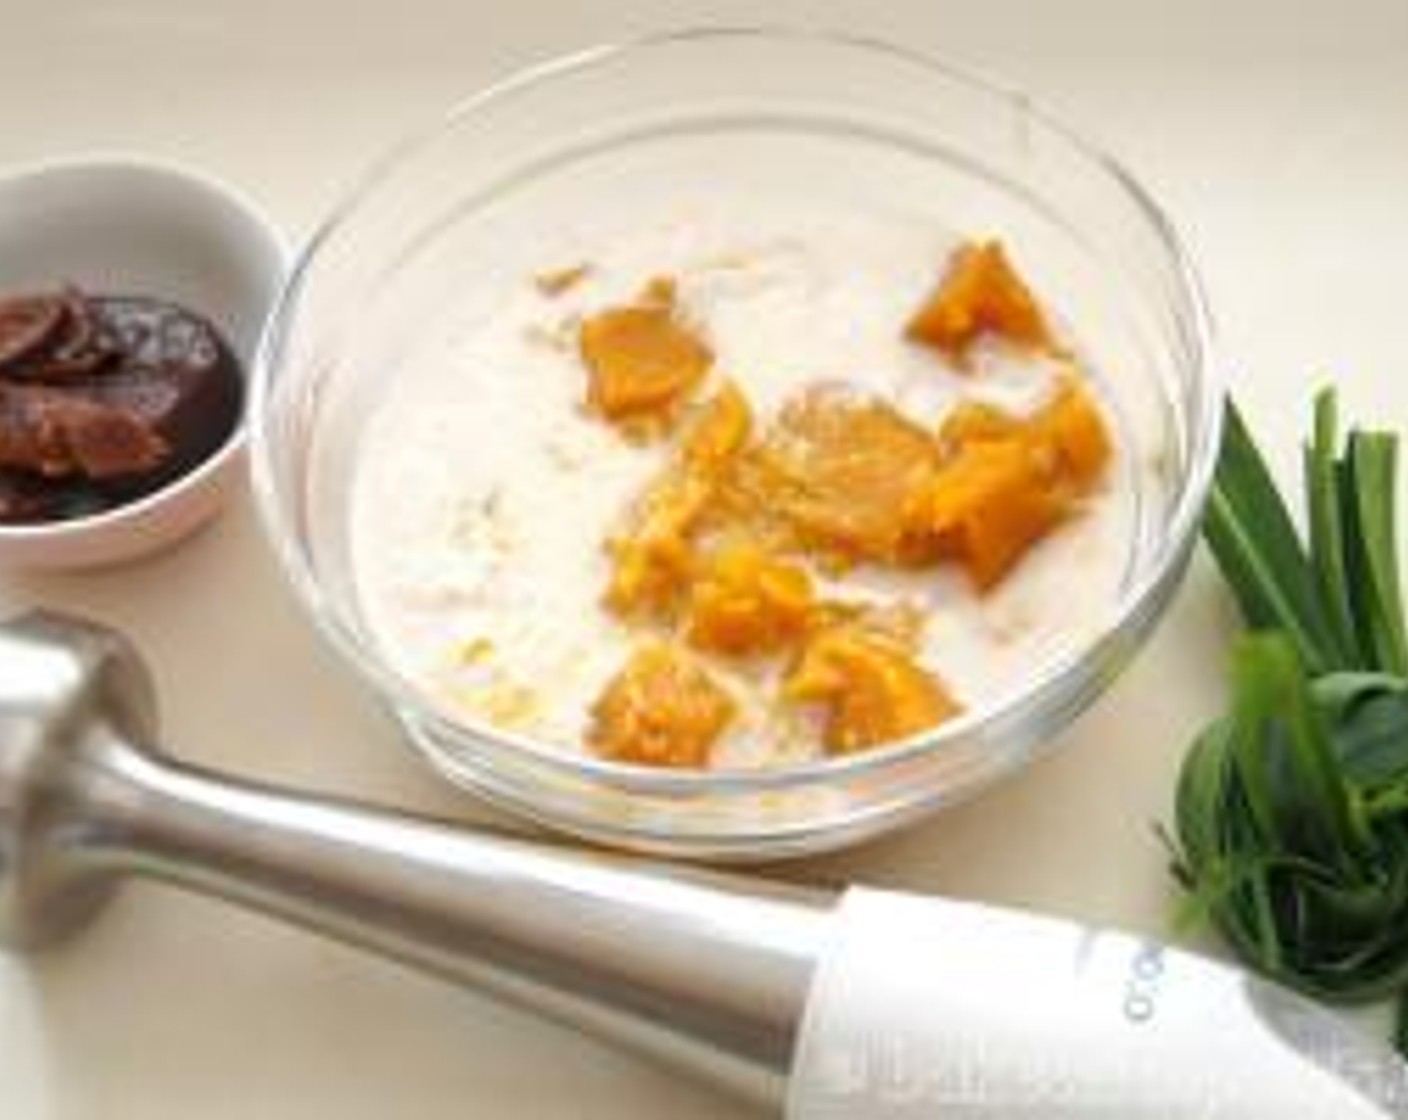 step 2 In a big bowl, add in pumpkin and Coconut Milk (1 cup) then blend with hand blender till smooth.